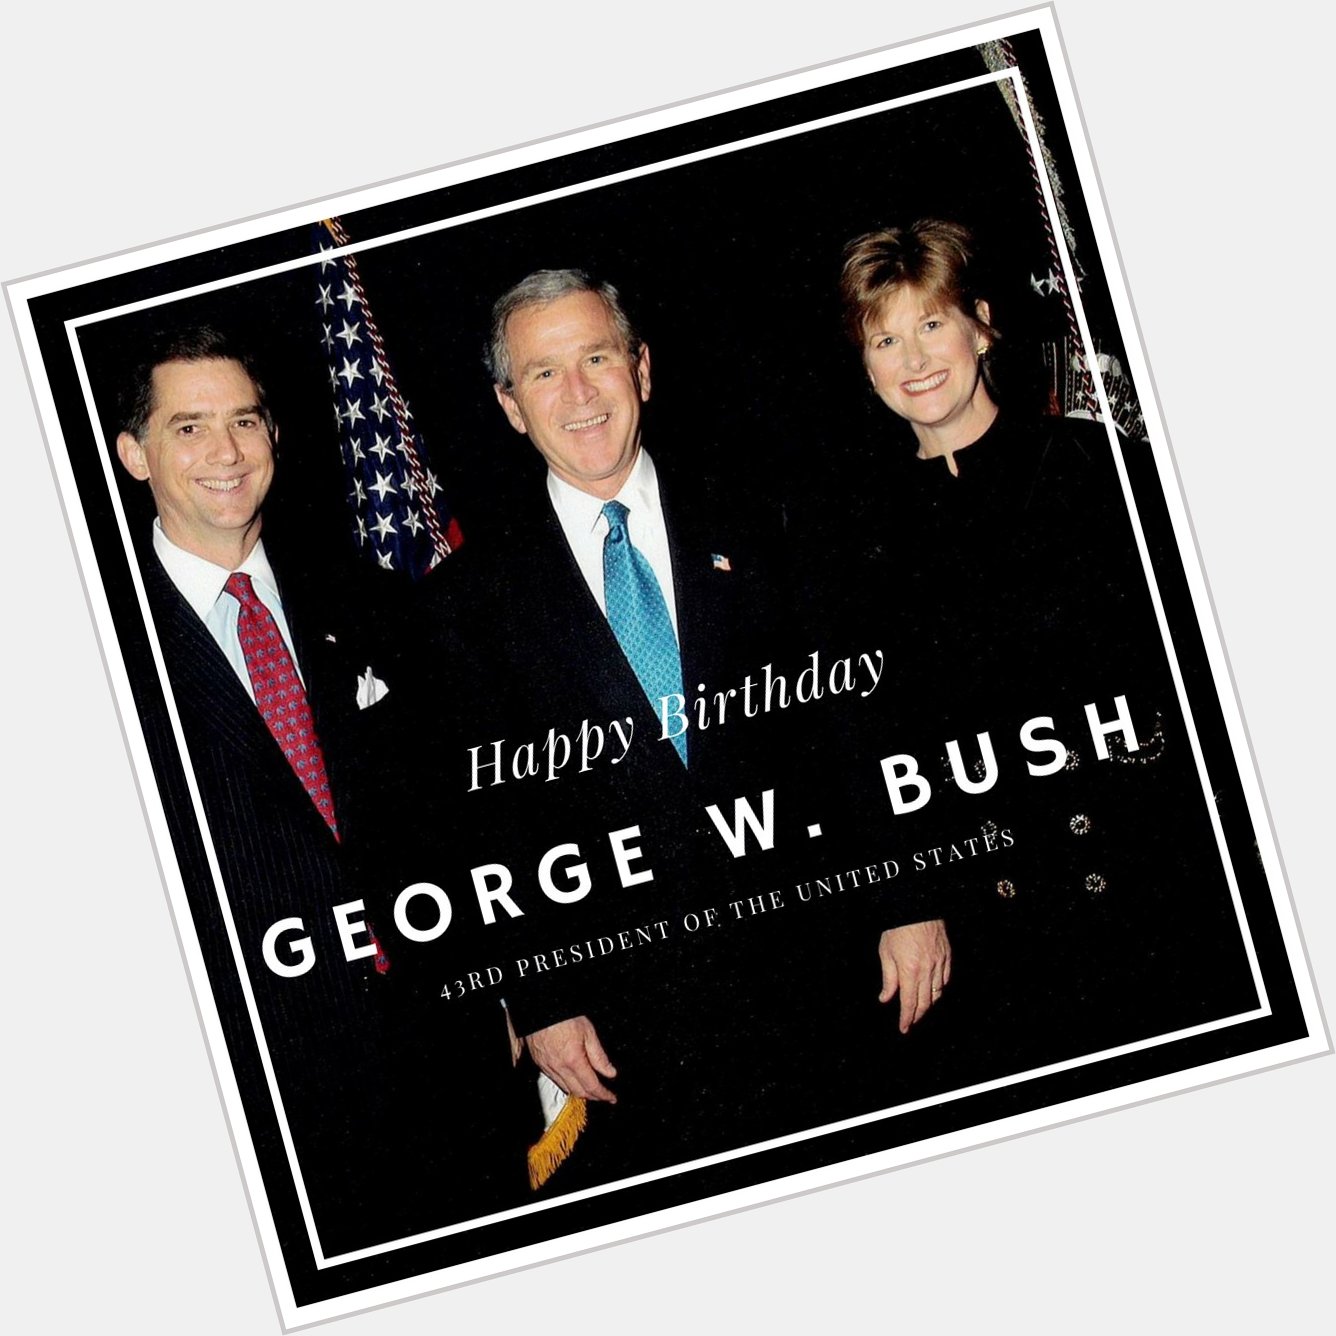 Please join me in wishing former President George W. Bush a very happy 72nd birthday! 